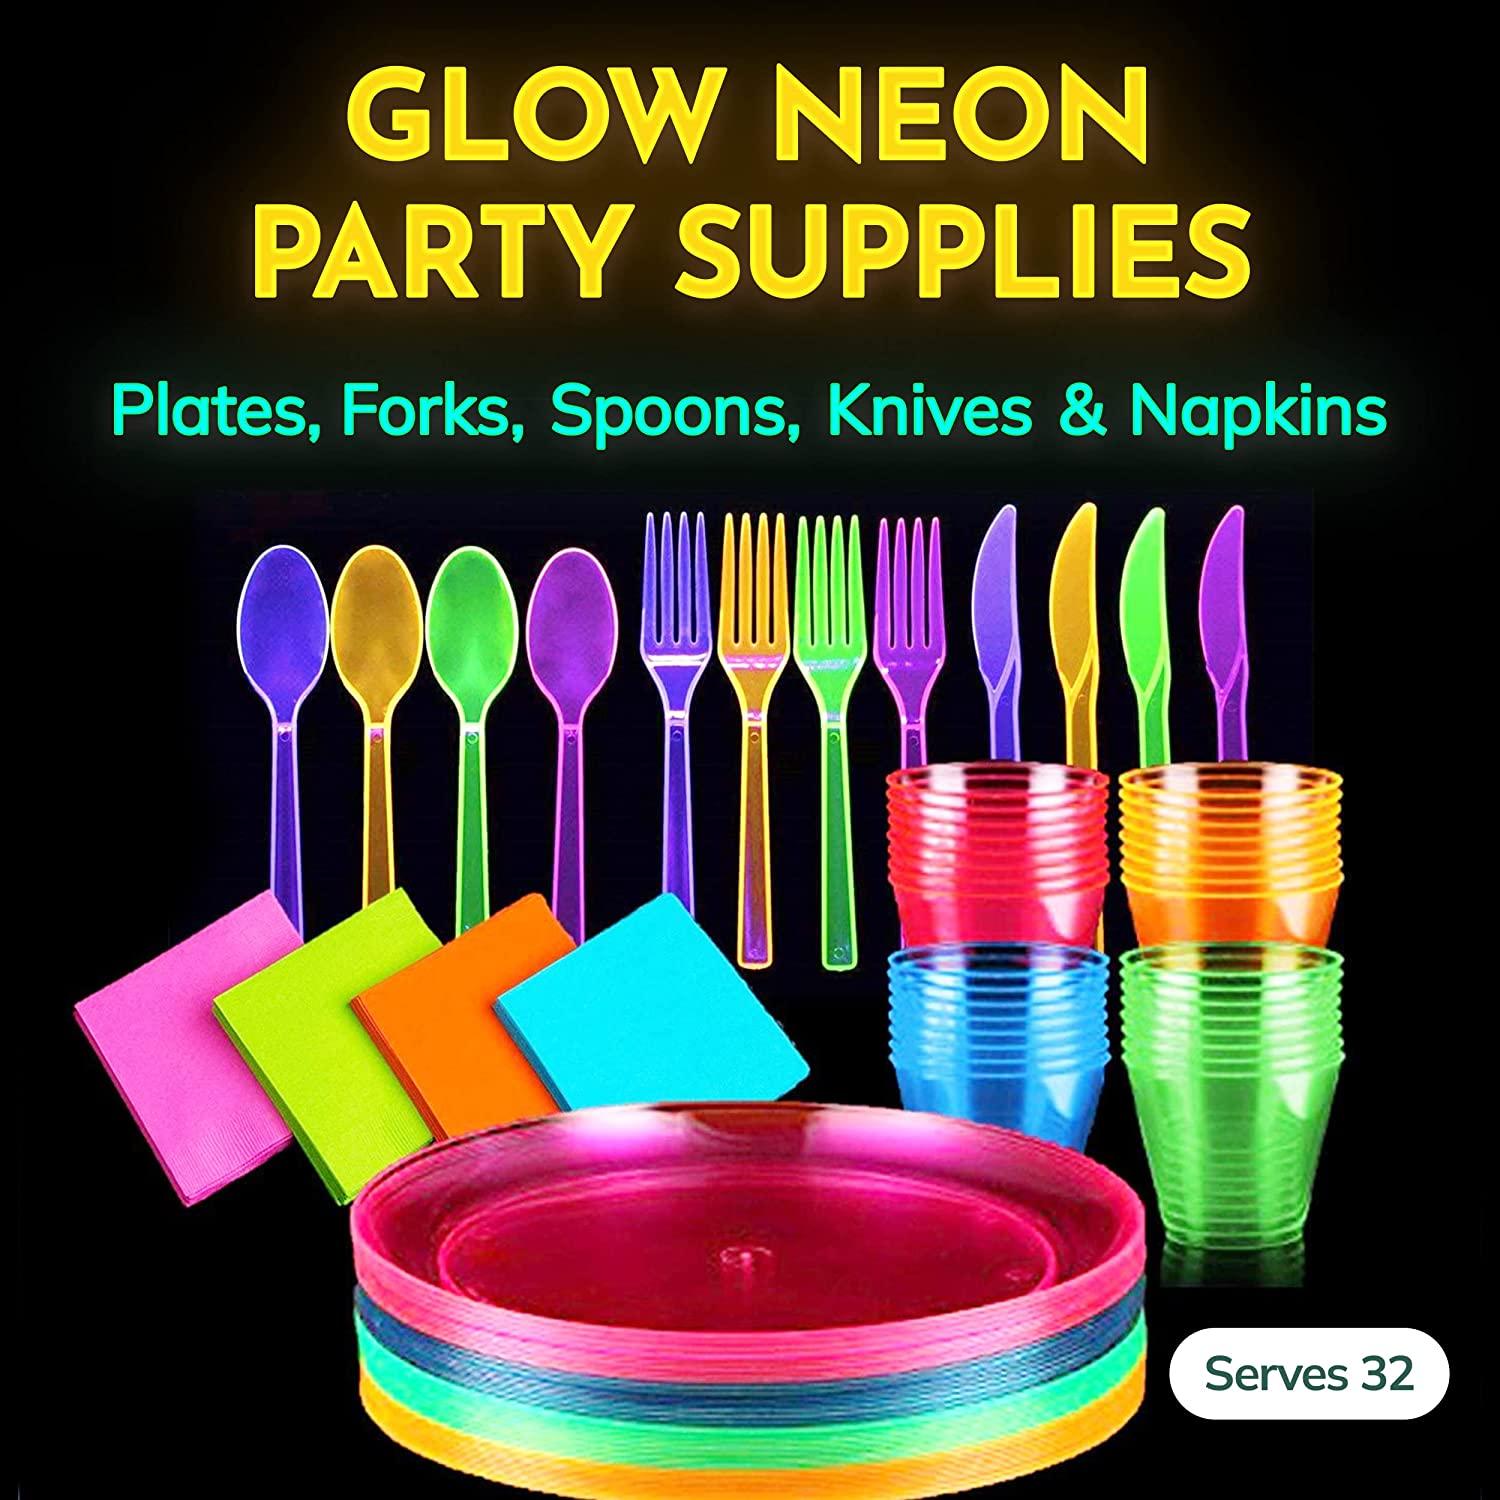 Glow Neon Party Supplies - Serves 32, Hard Plastic Disposable Neon